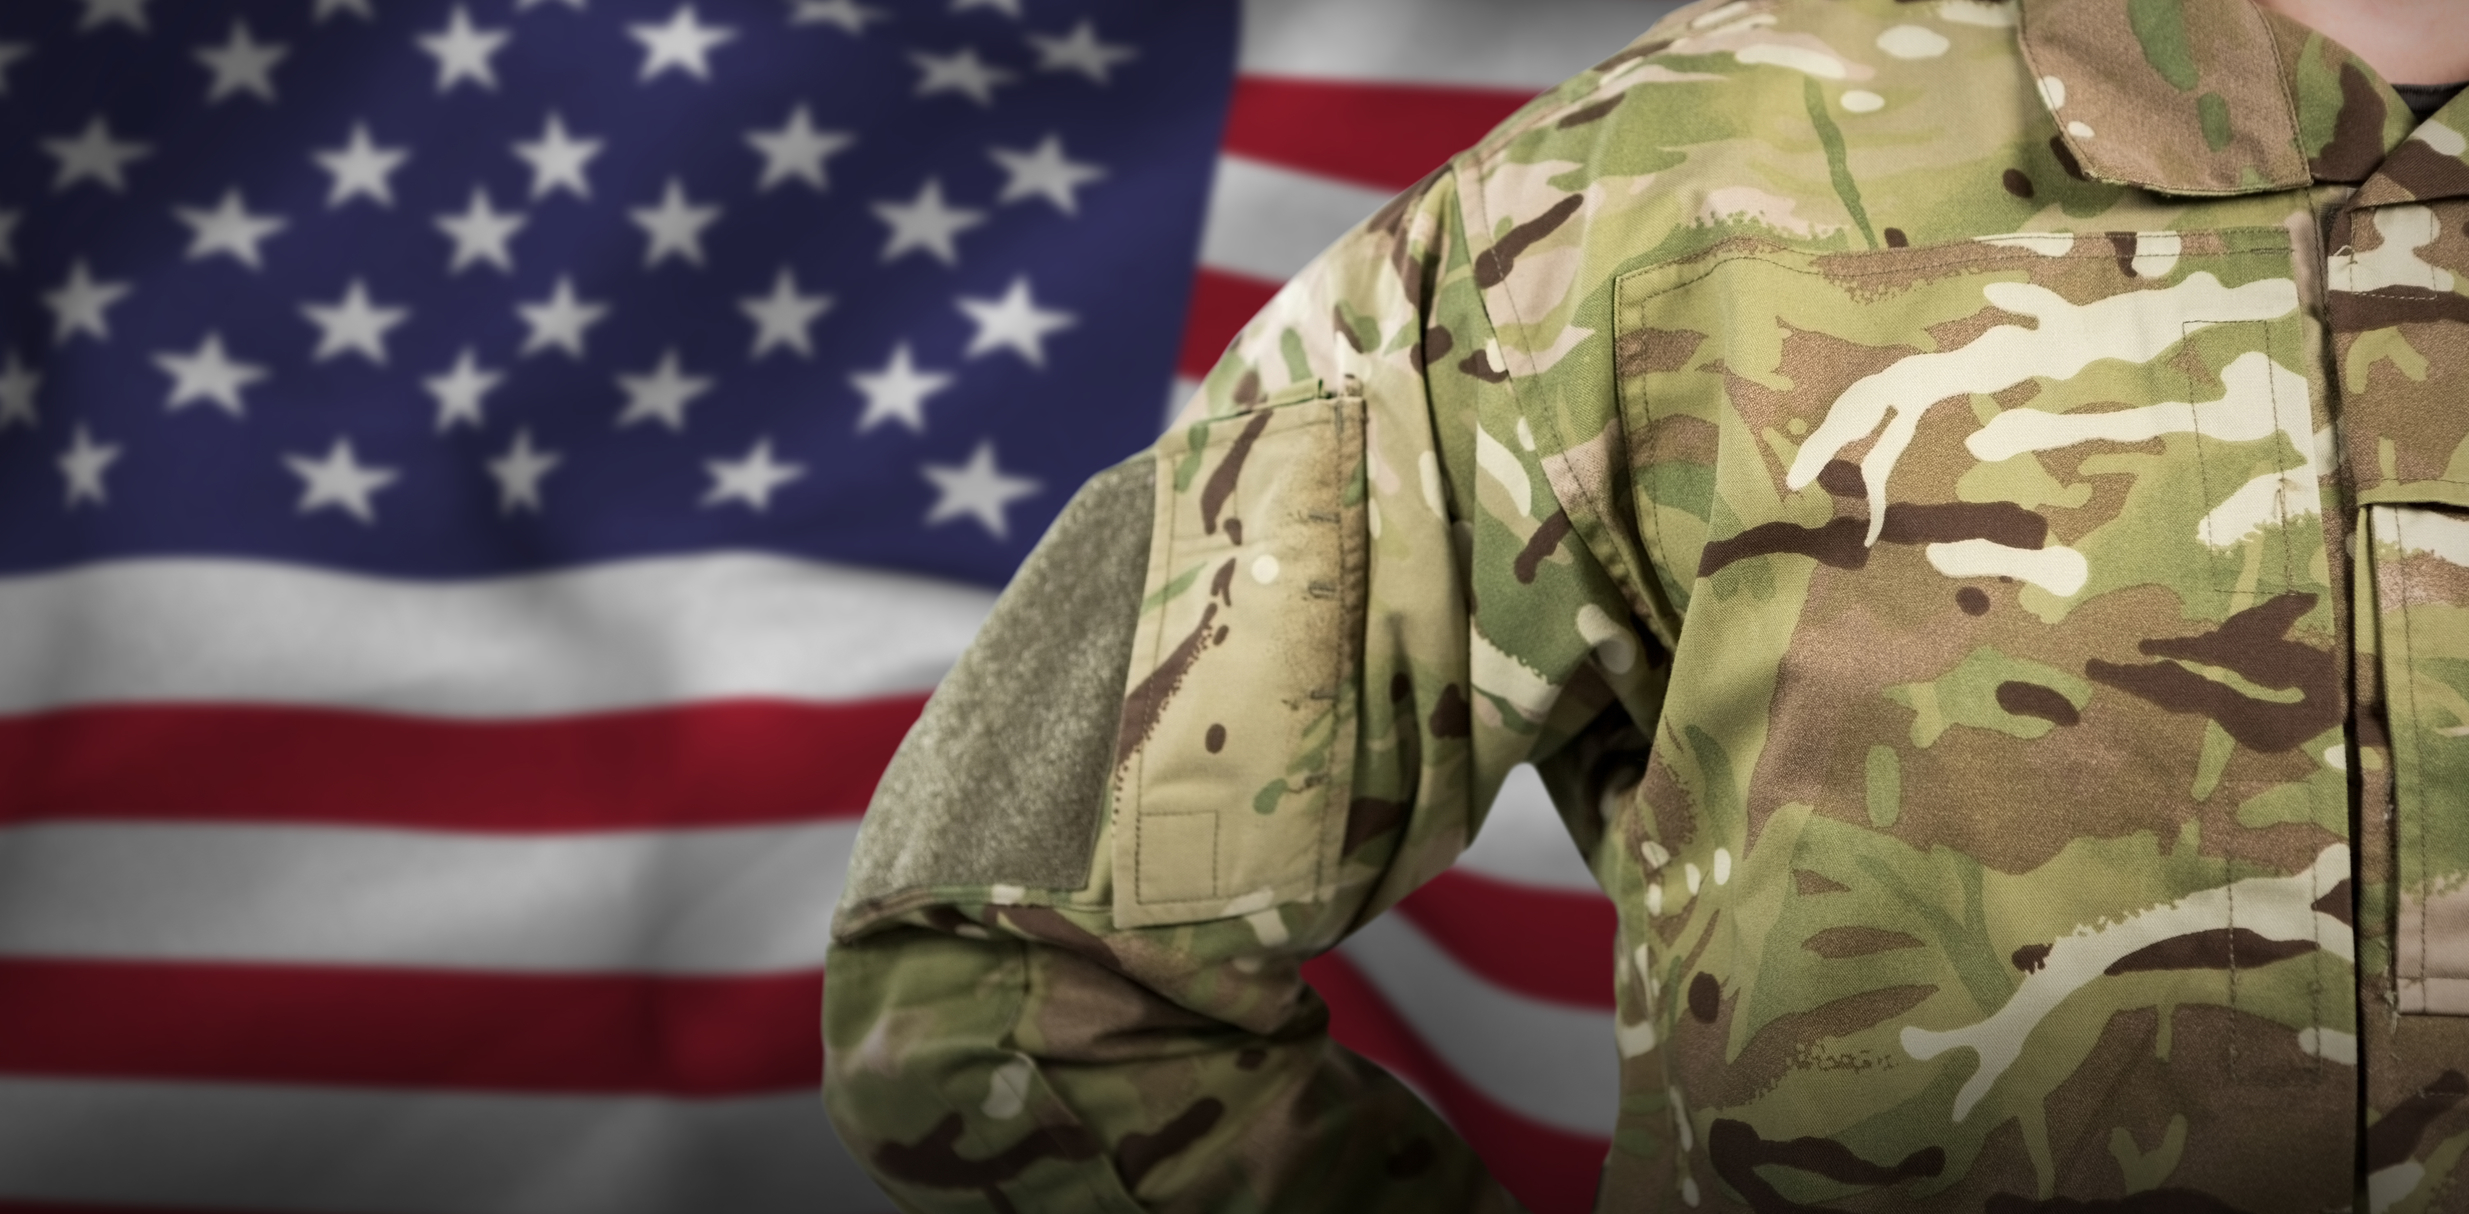 Military members can save up to 60% with new travel website